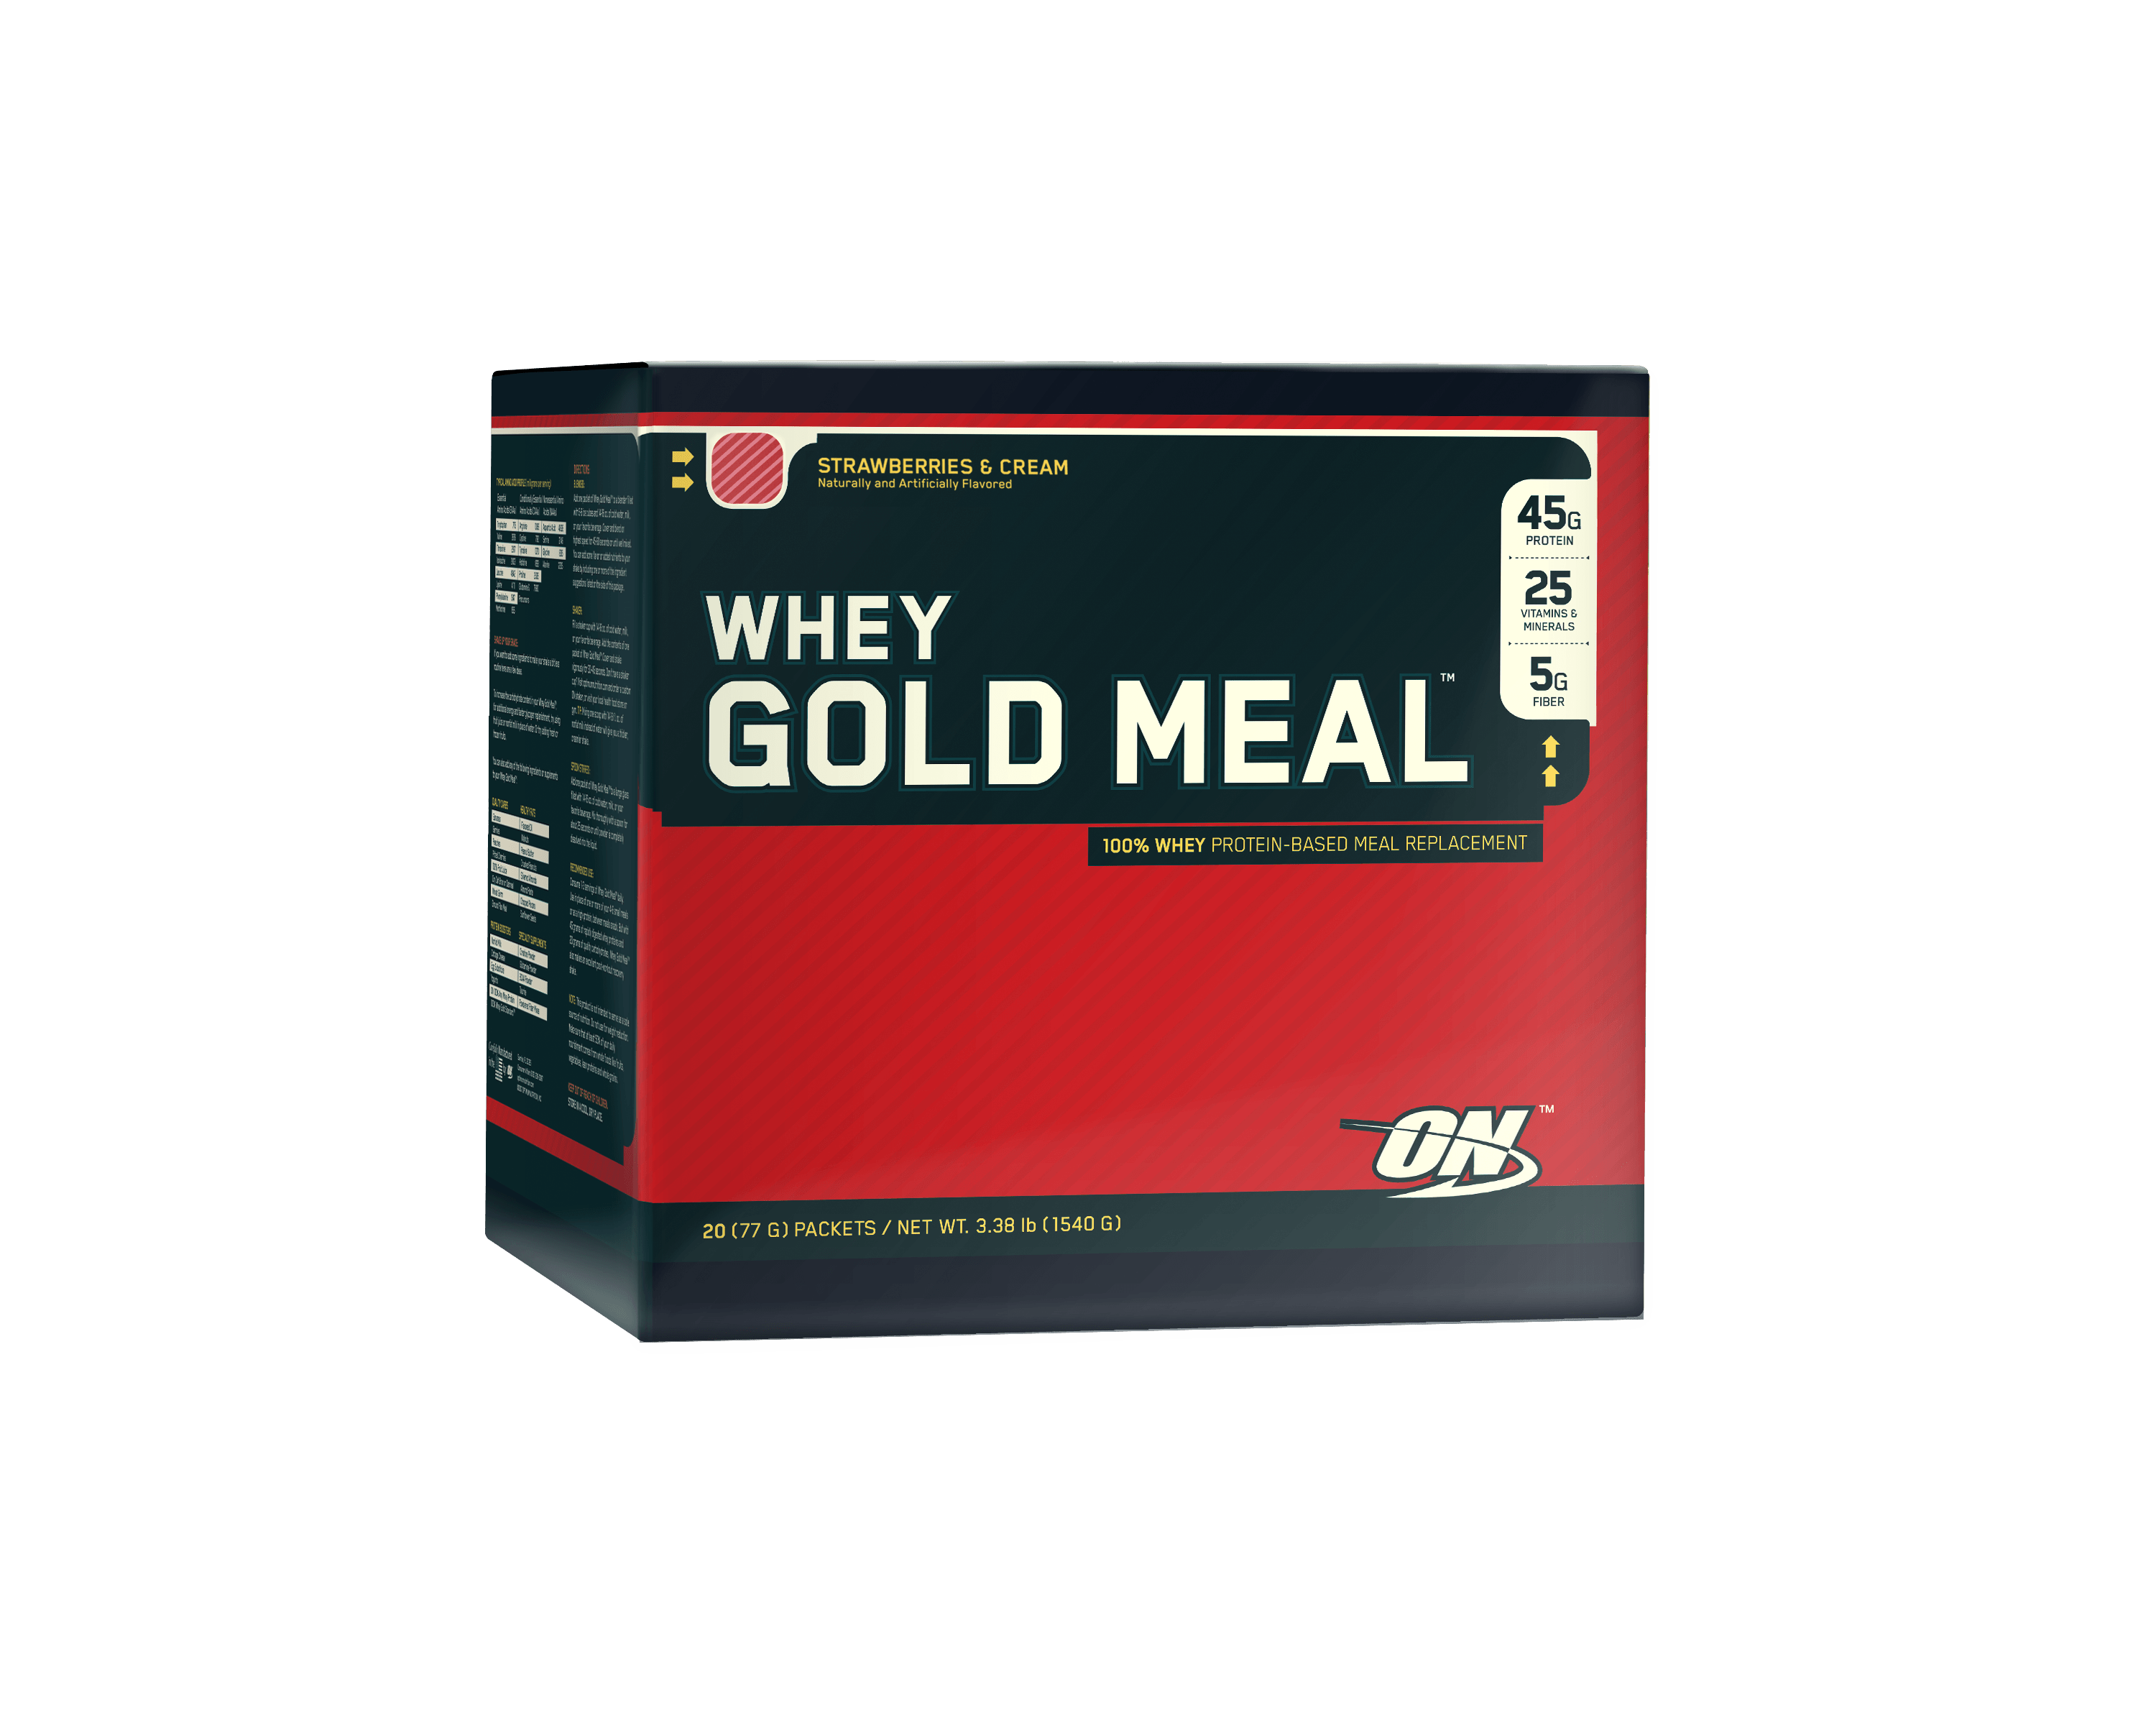 Whey Gold Meal, 1540 g, Optimum Nutrition. Meal replacement. 